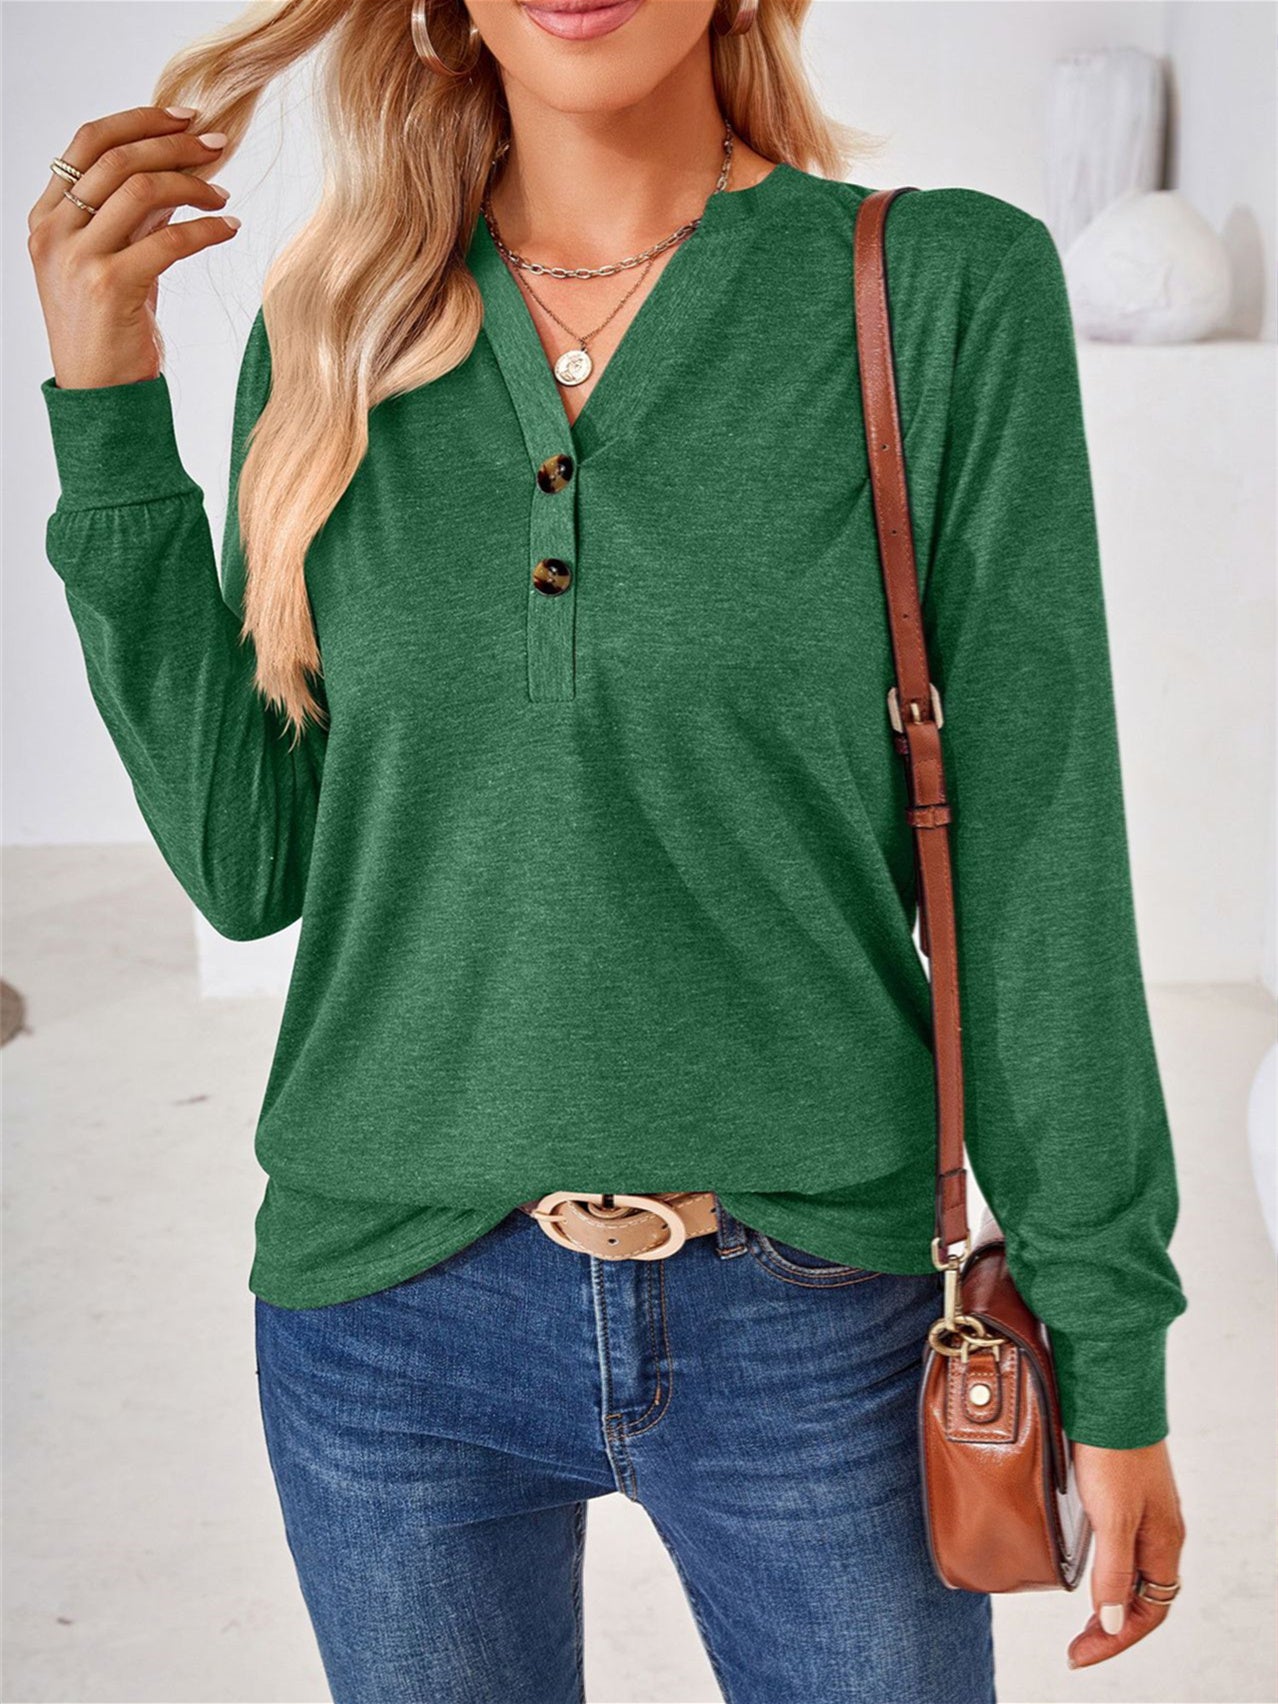 Women's Stitching Button Solid Color V-Neck Long Sleeve Top